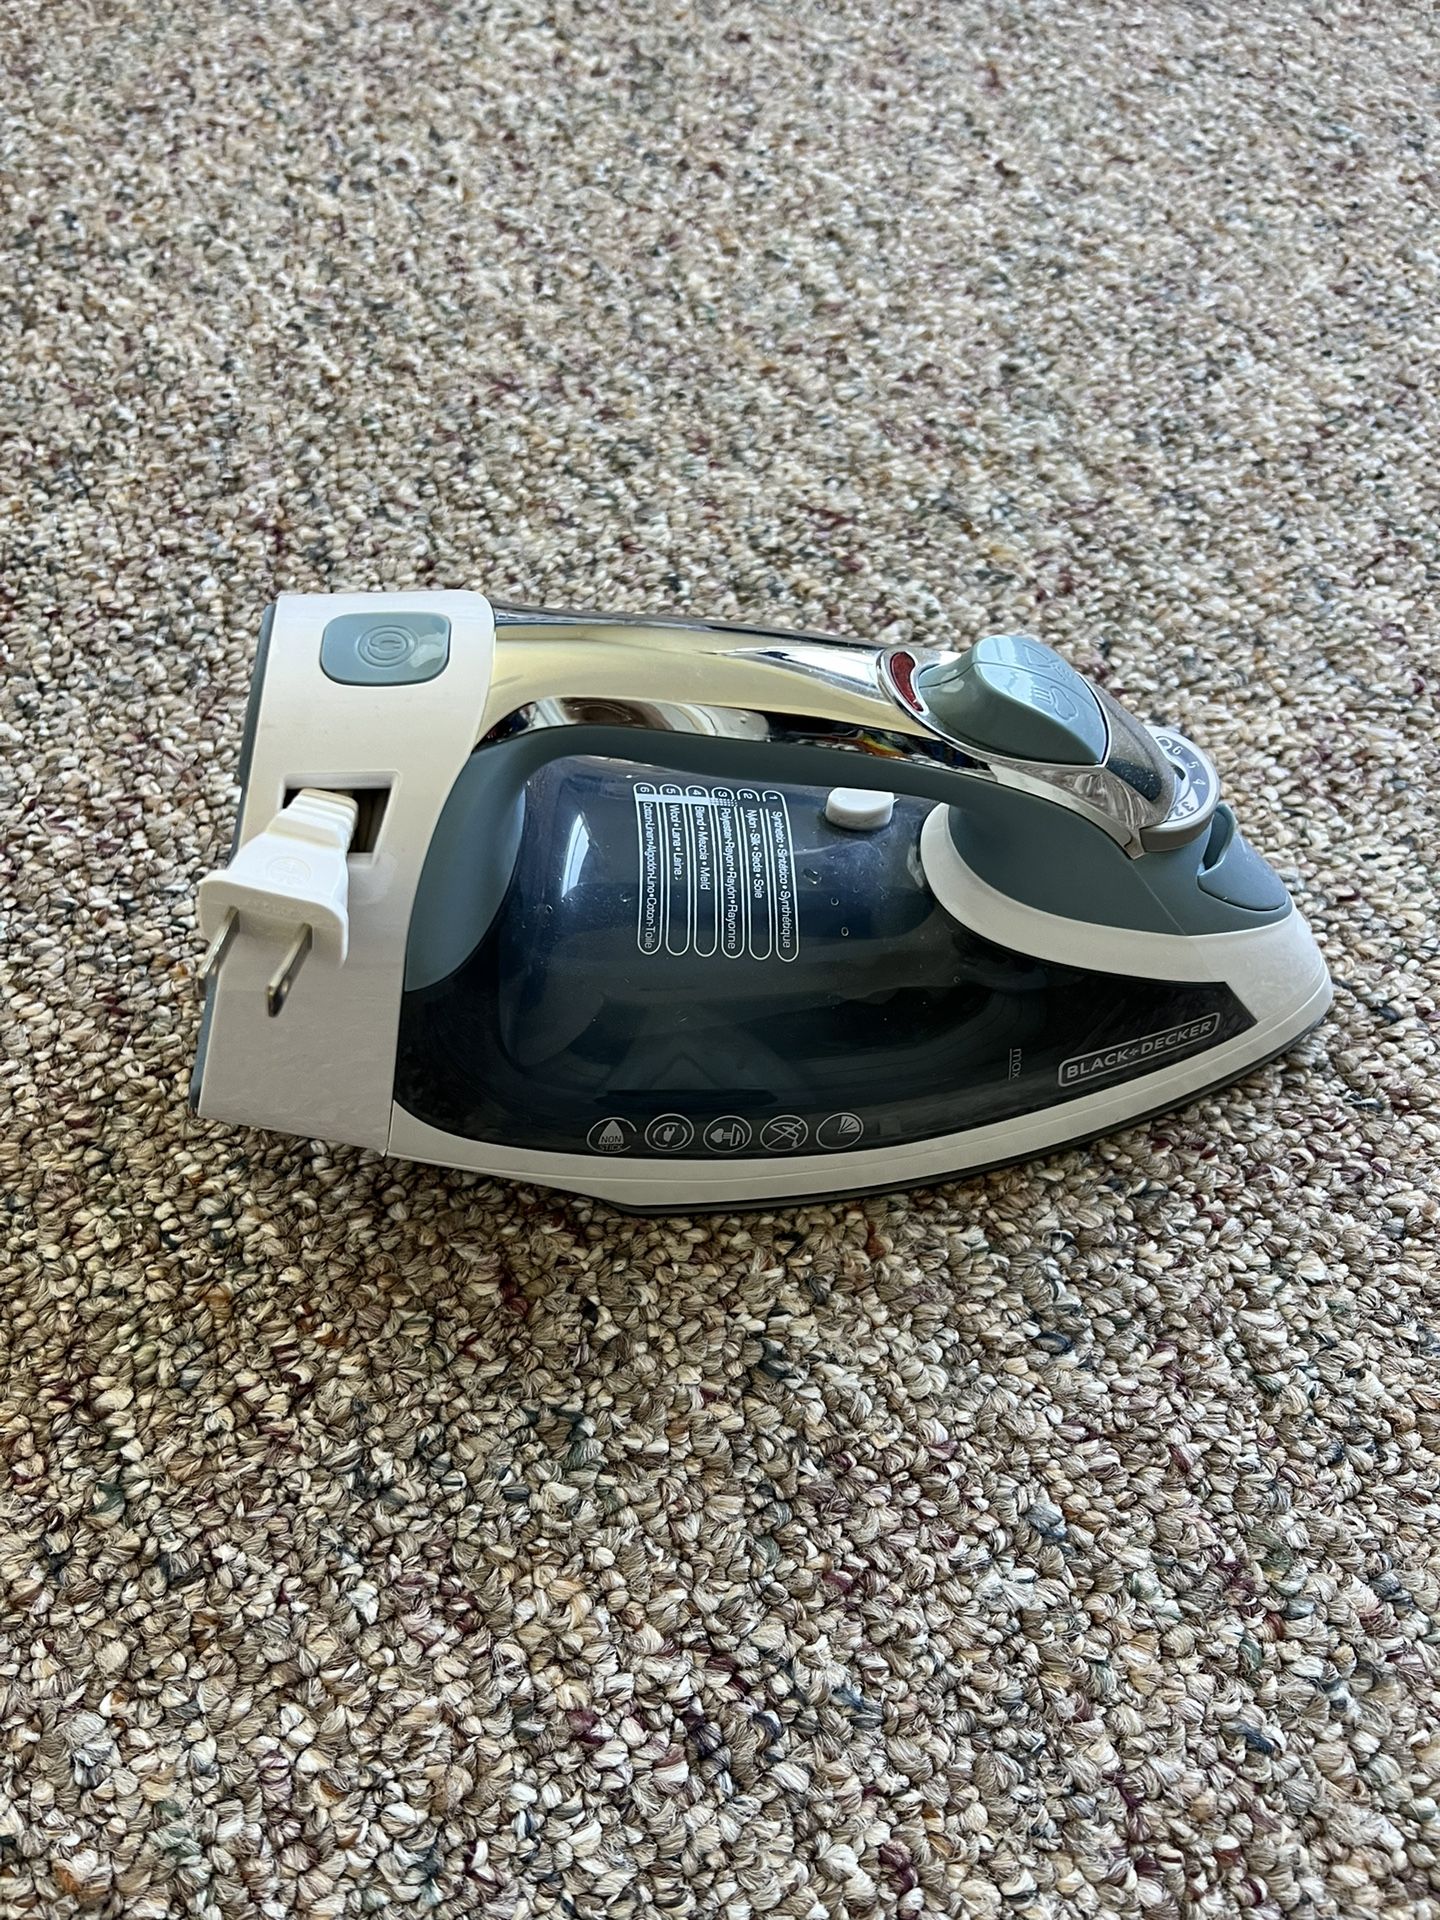 Almost New Steam Iron 